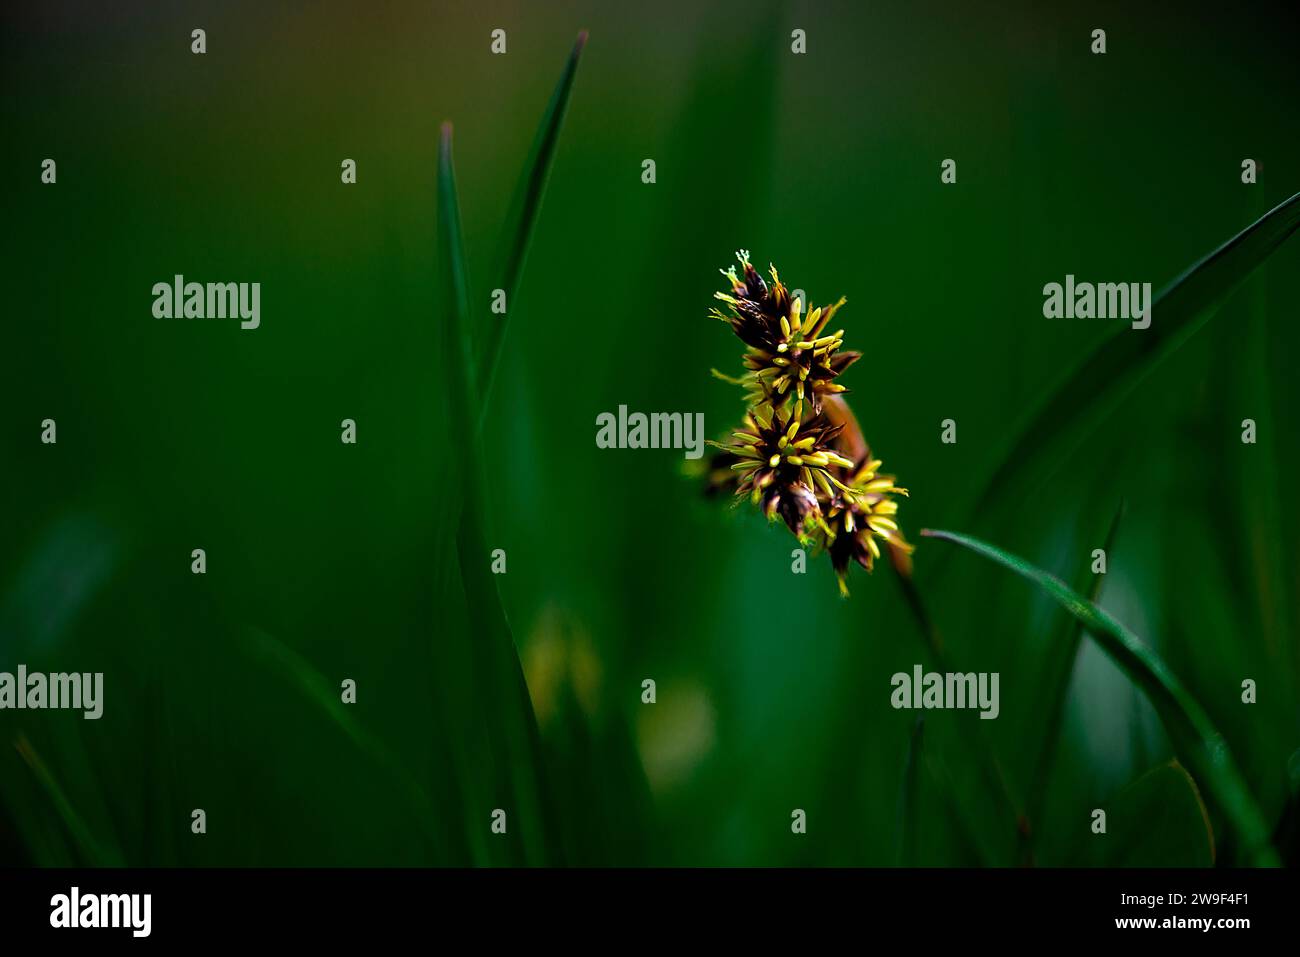 A vibrant yellow flower stands out in stark contrast to the lush green background, its petals reaching outwards in a beautiful display Stock Photo